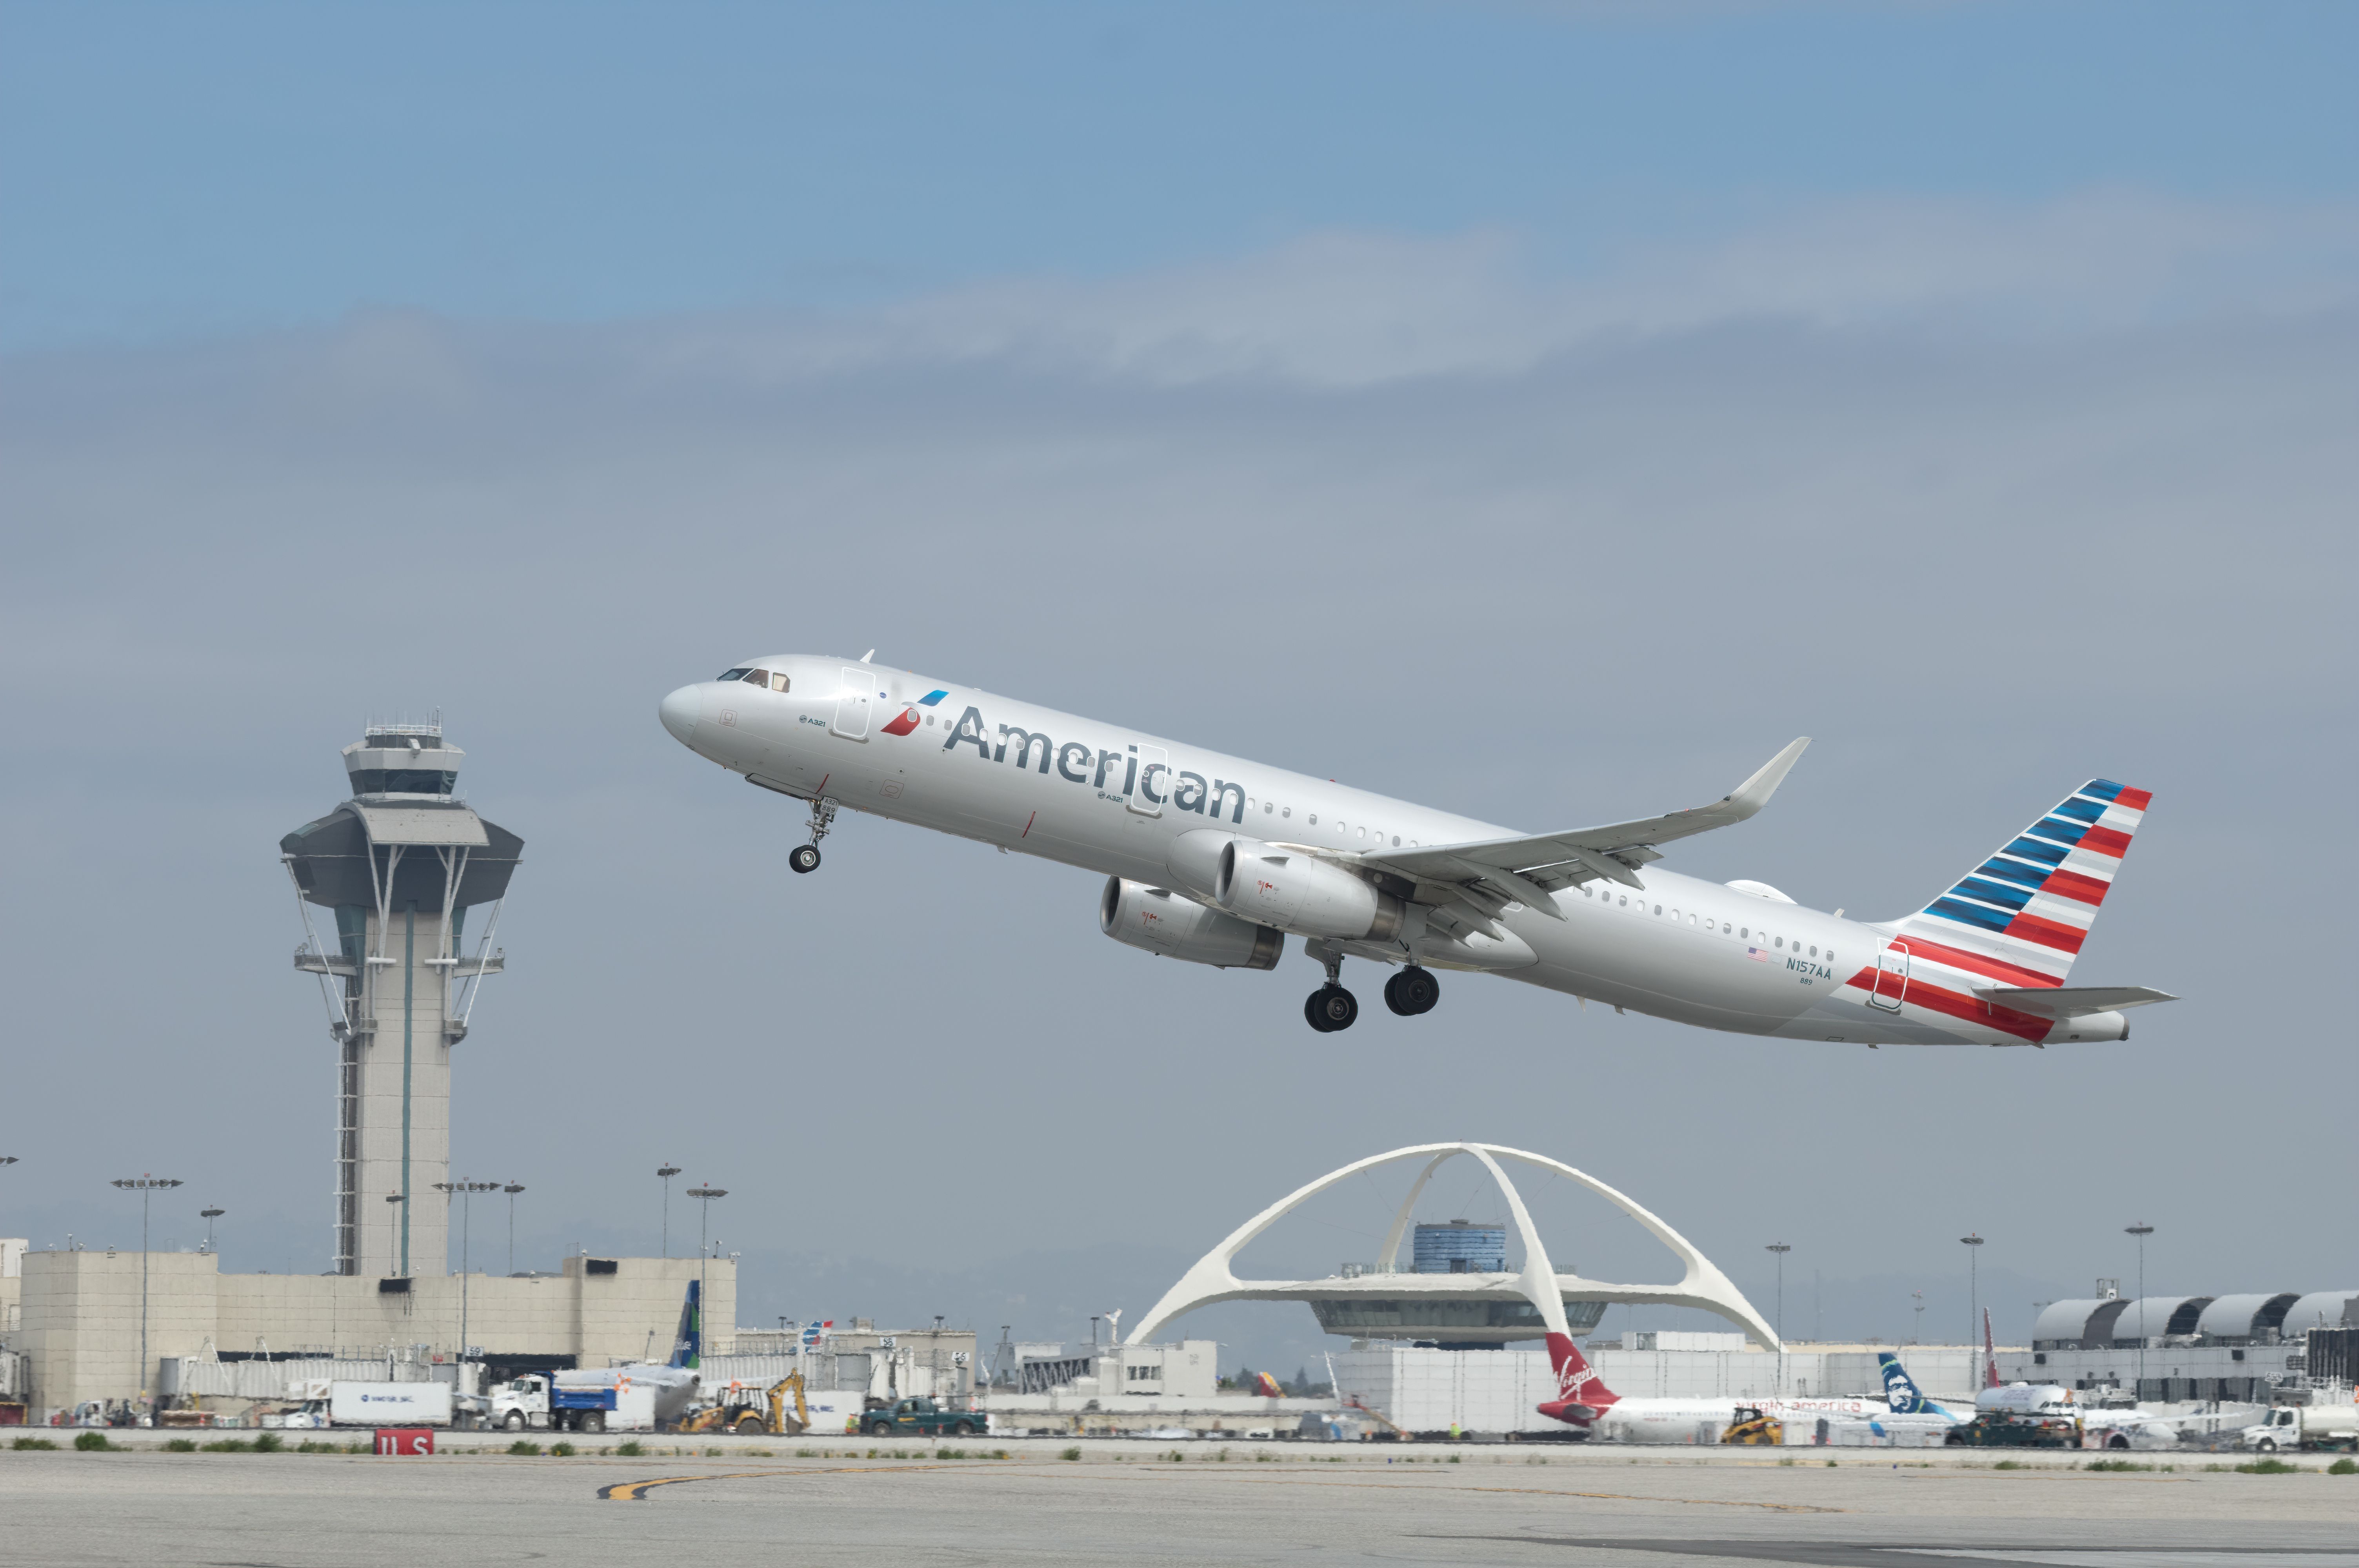 An American Airlines Airbus A321 with registration N157AA shown taking off from the Los Angeles International Airport, LAX.